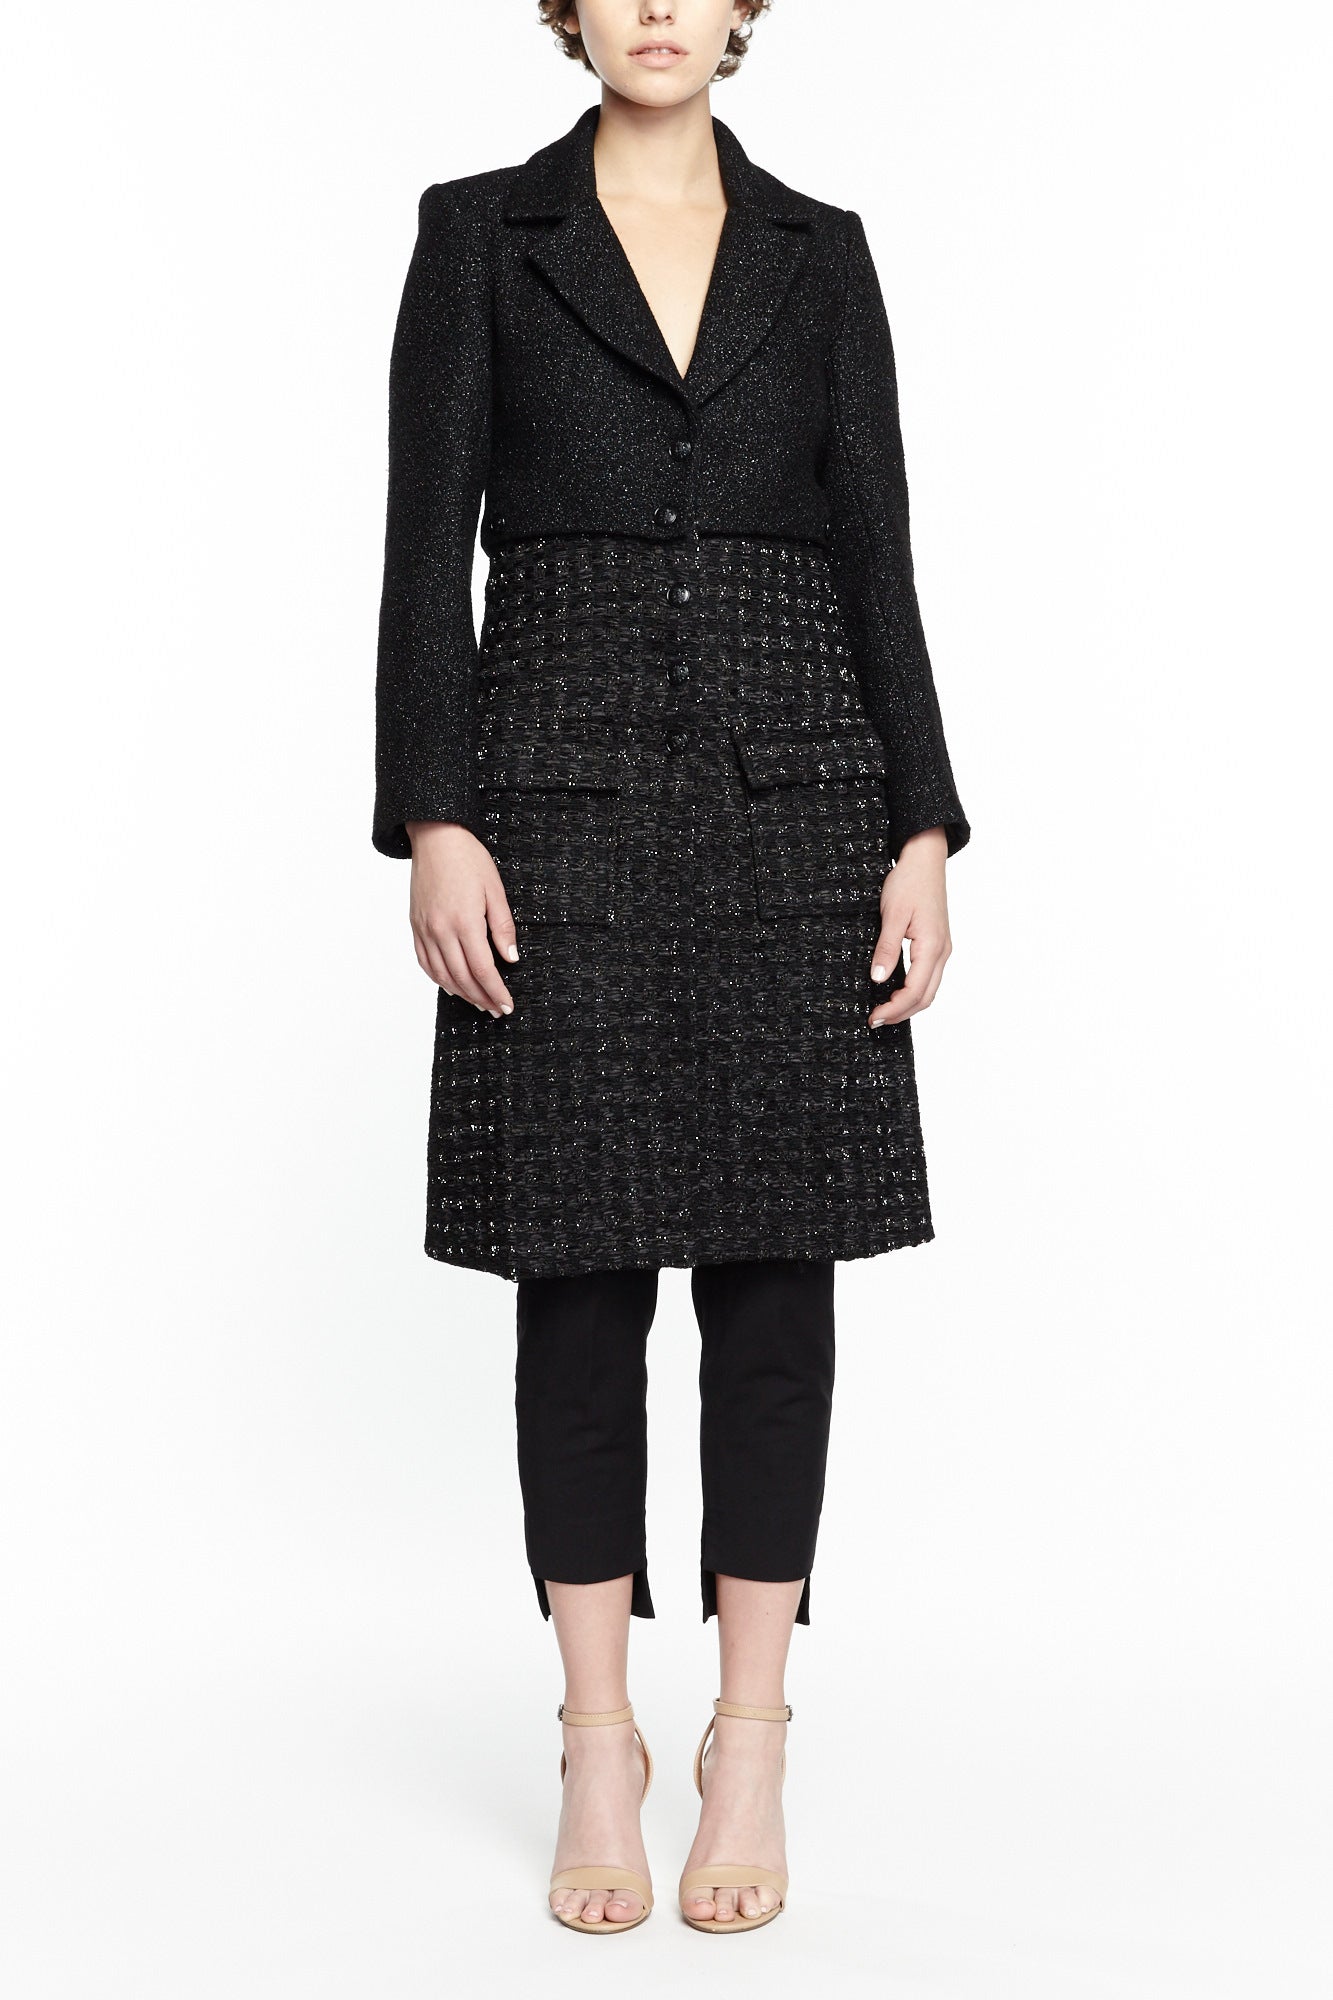 COCO BLACK TWILL AND TWEED JACKET, Outerwear